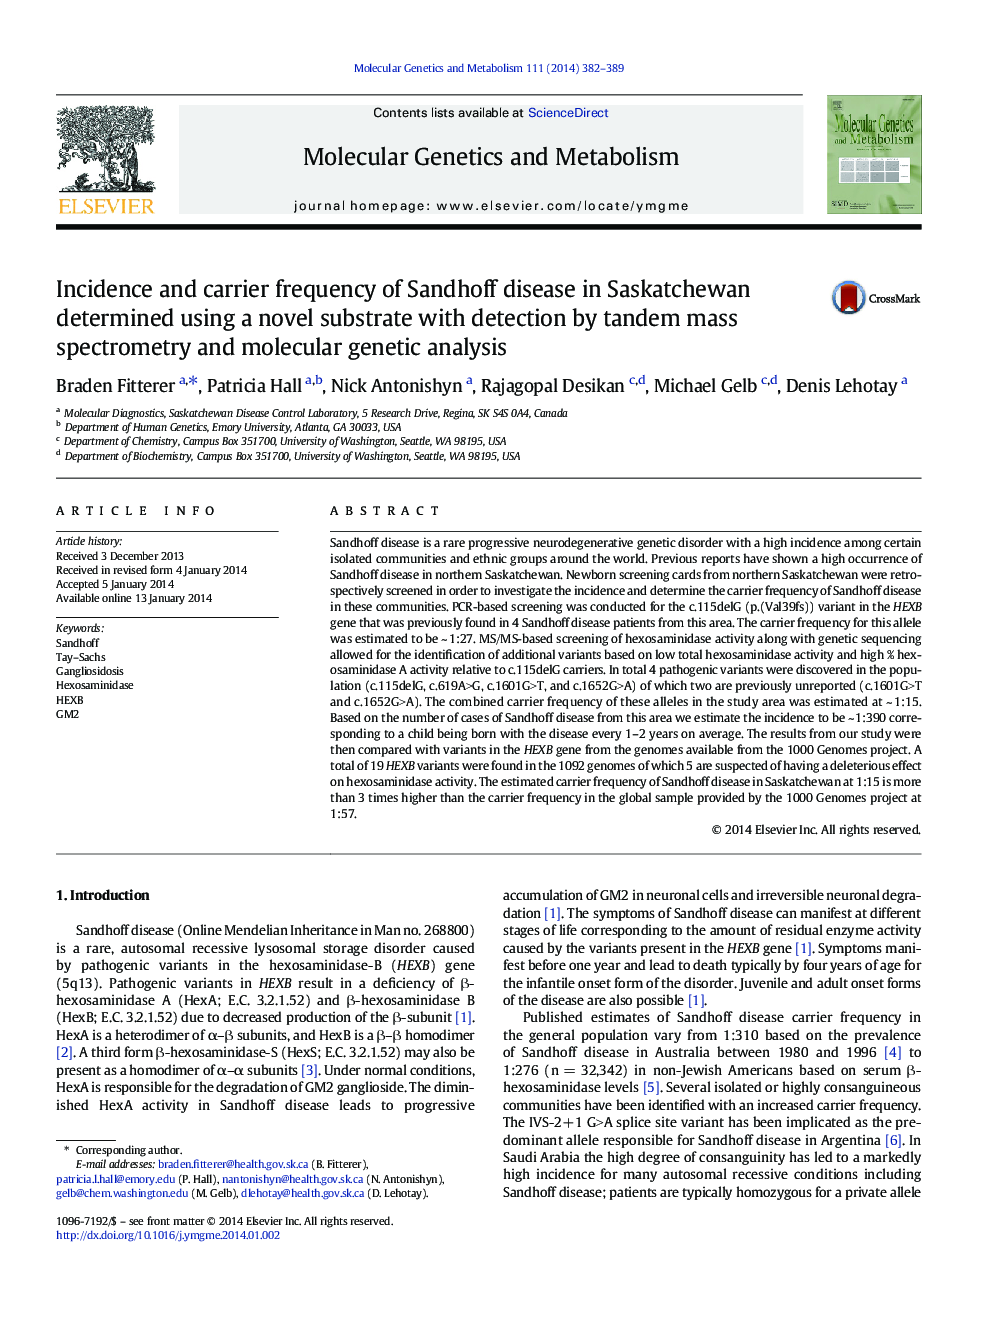 Incidence and carrier frequency of Sandhoff disease in Saskatchewan determined using a novel substrate with detection by tandem mass spectrometry and molecular genetic analysis